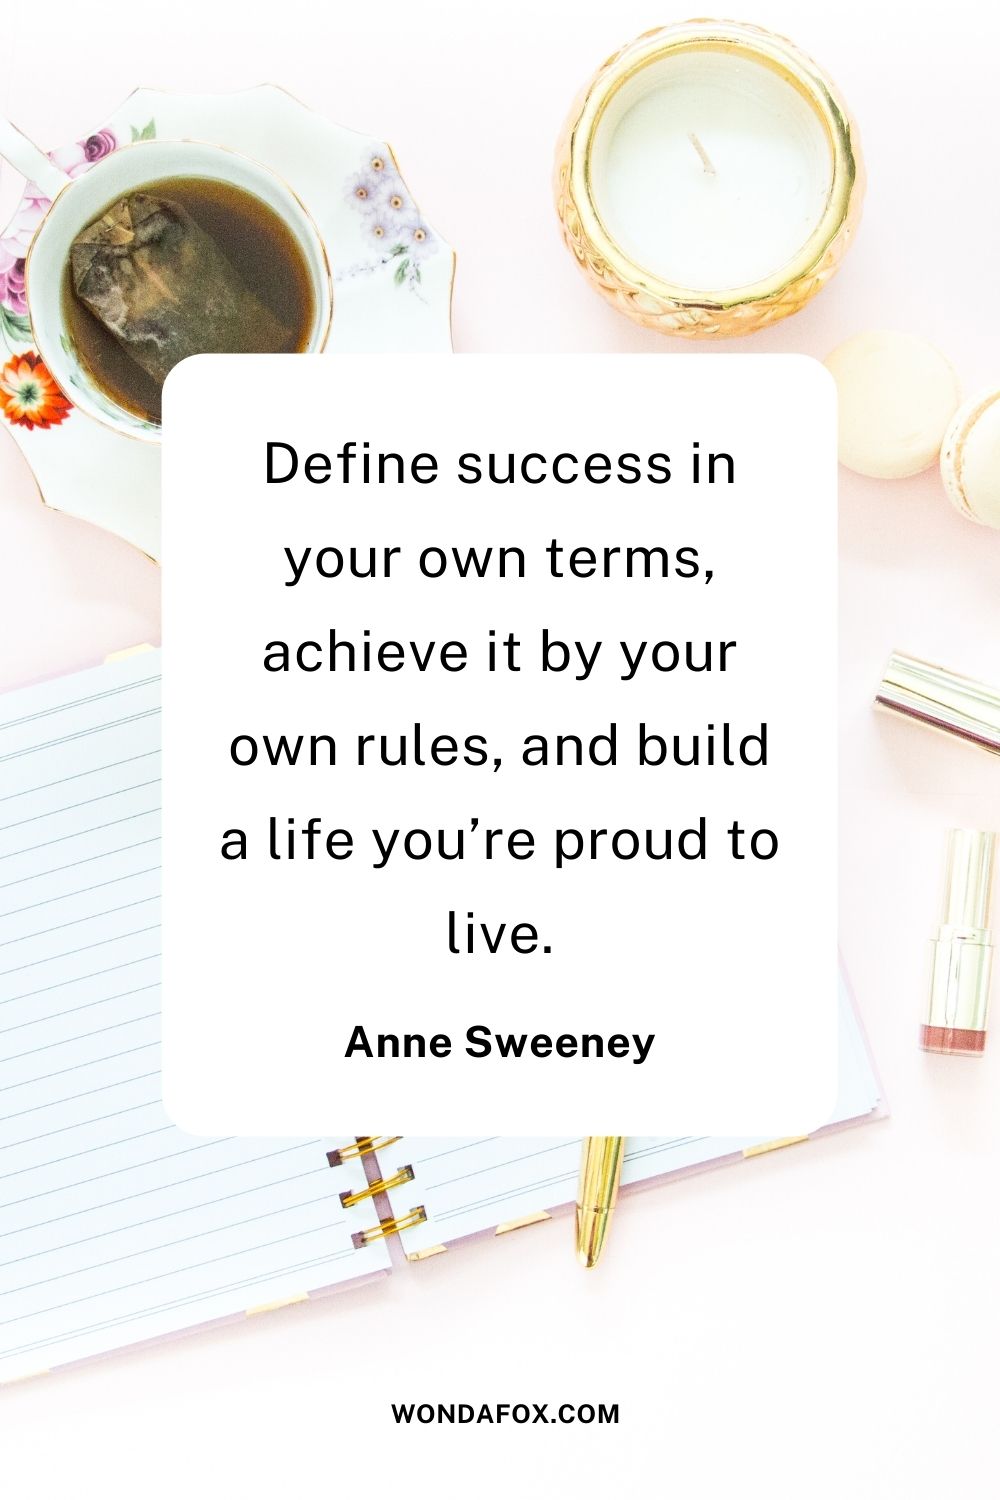 Define success in your own terms, achieve it by your own rules, and build a life you’re proud to live.